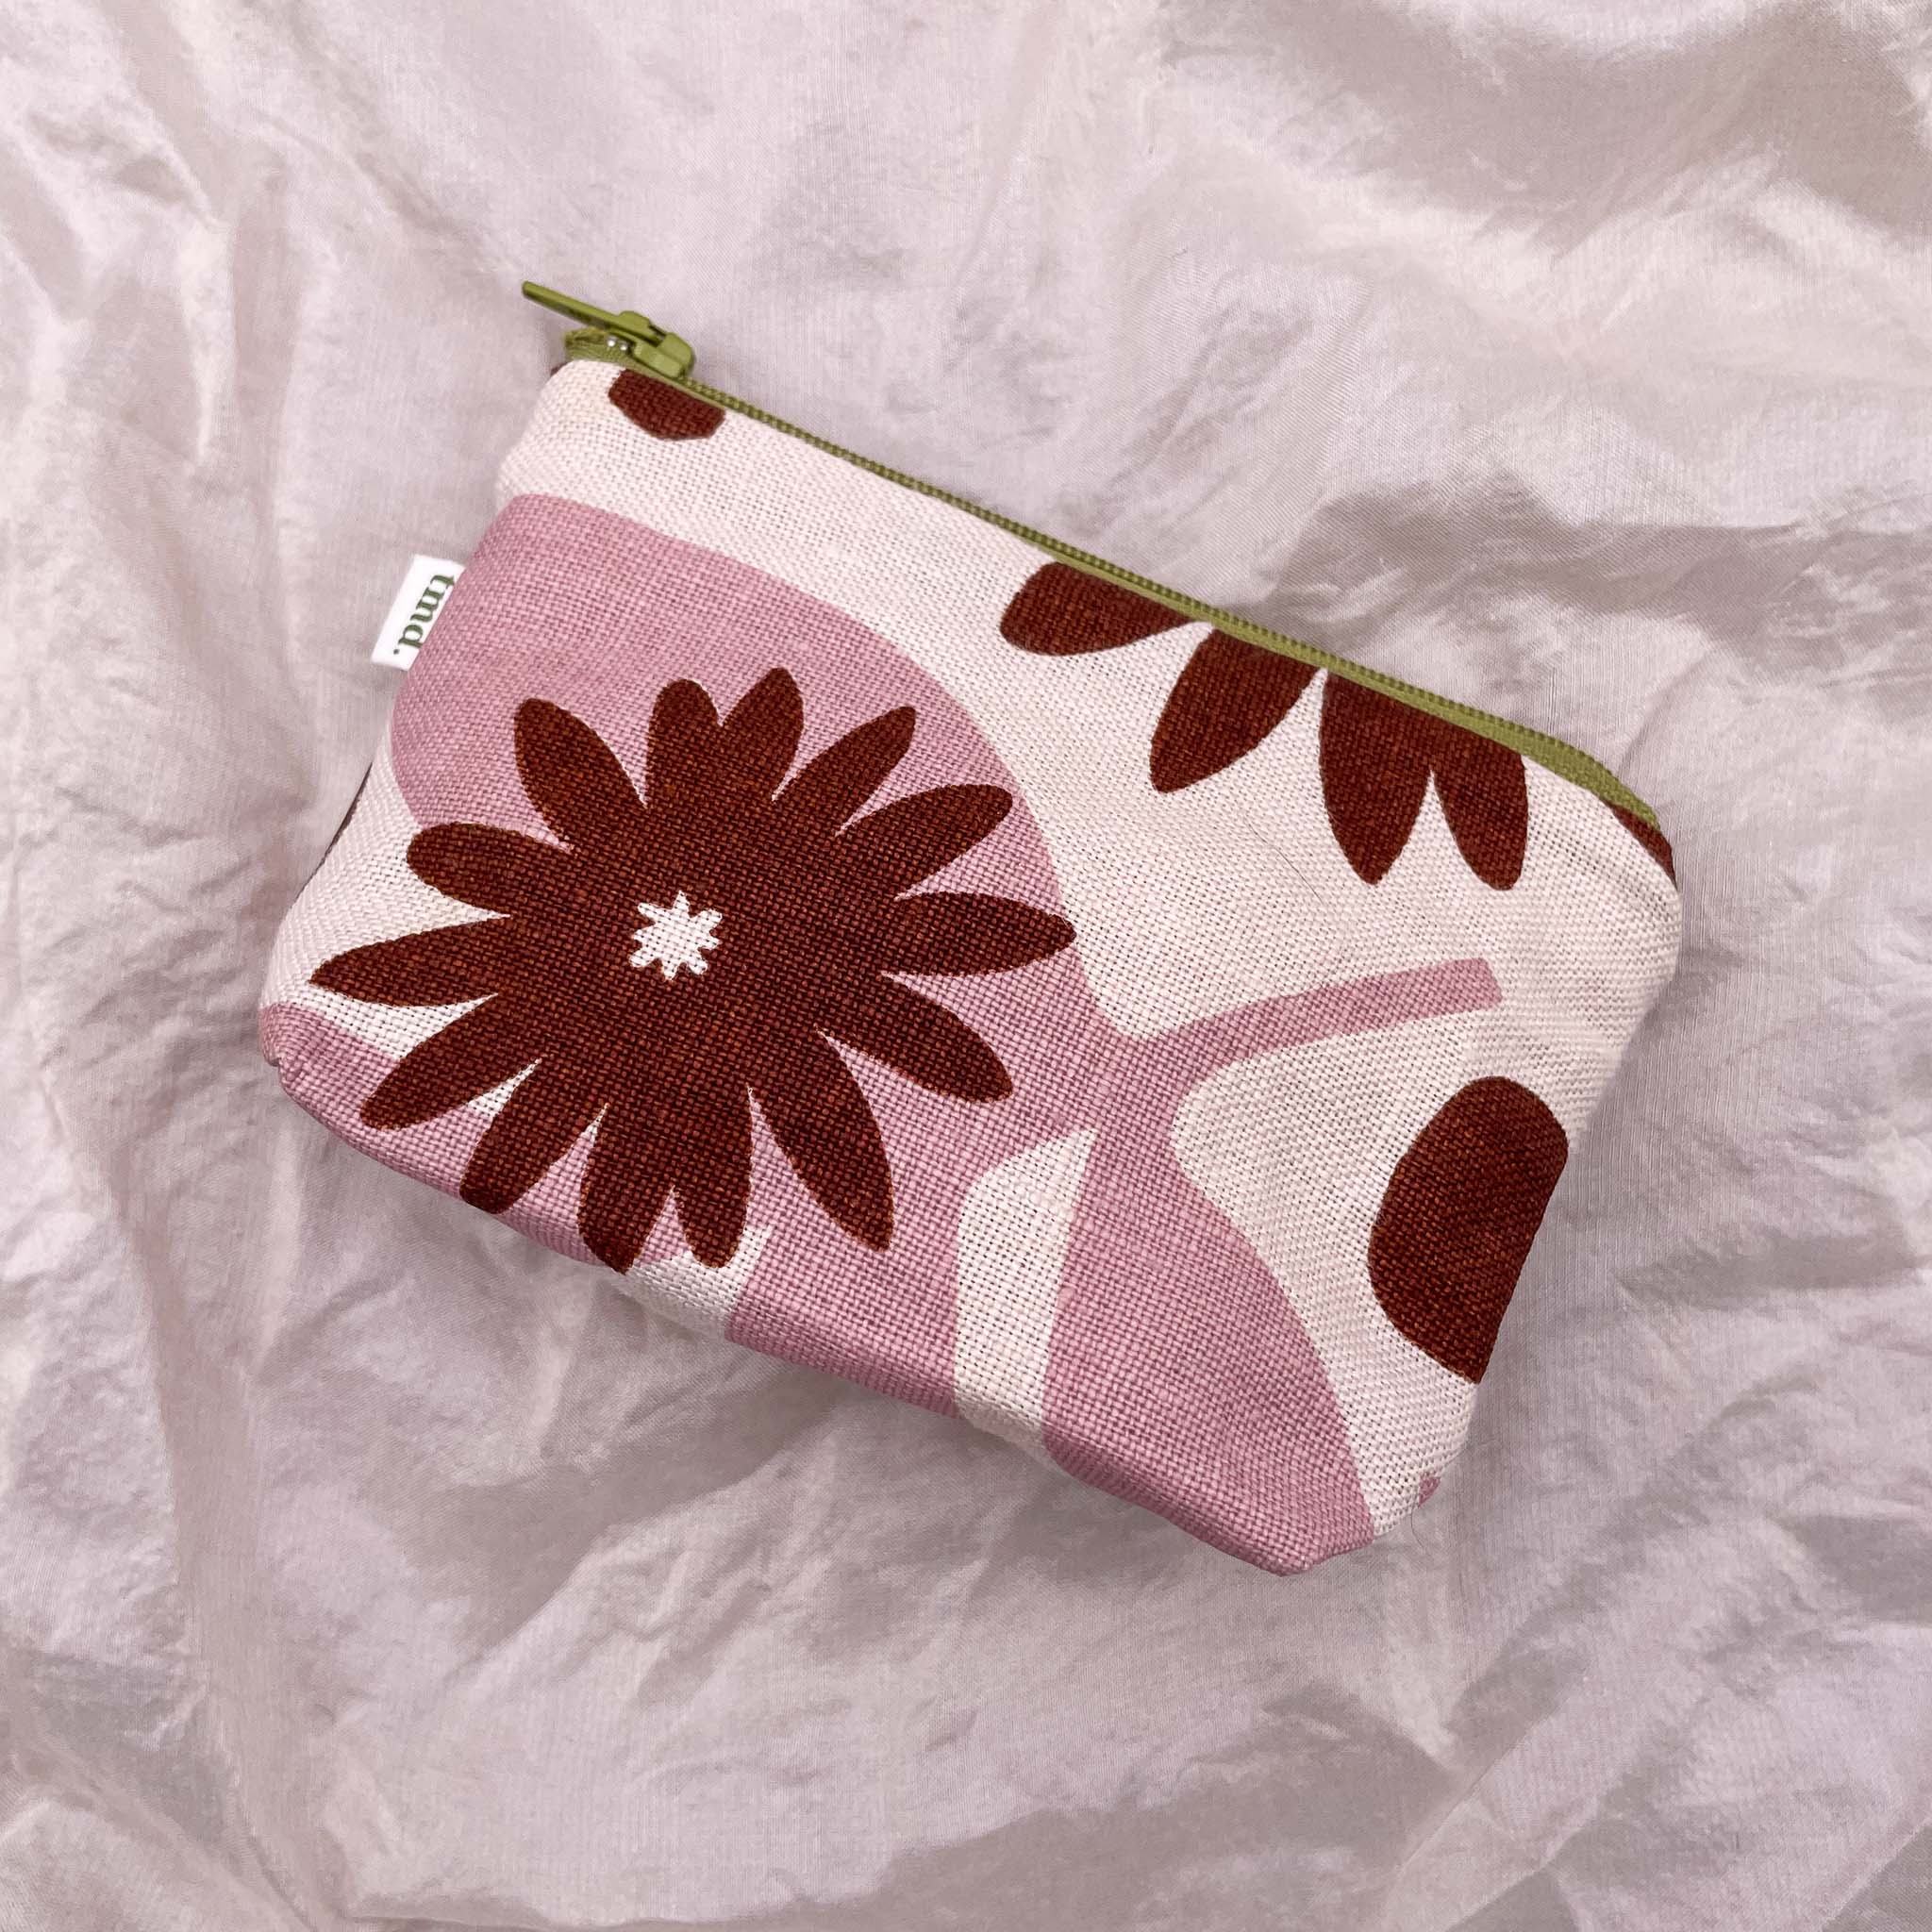 Little Bag - Abstract Floral in Dusty Pink and Chocolate